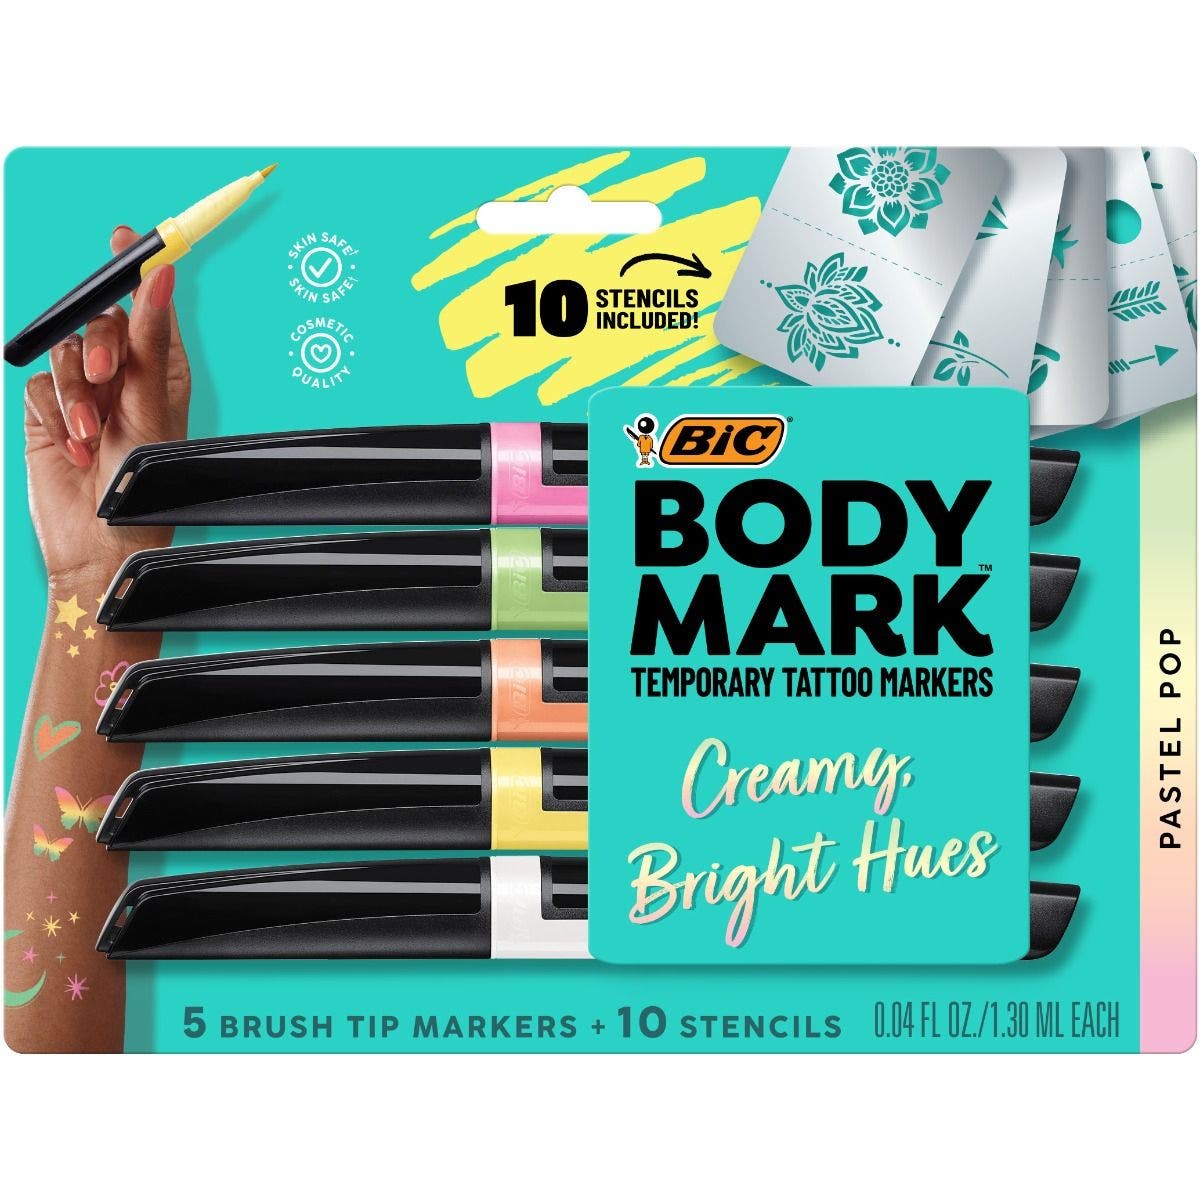 BodyMark BIC Temporary Tattoo Markers for Skin, Black, Mixed Tip, 12-Count  Pack, Skin-Safe*, Cosmetic Quality 